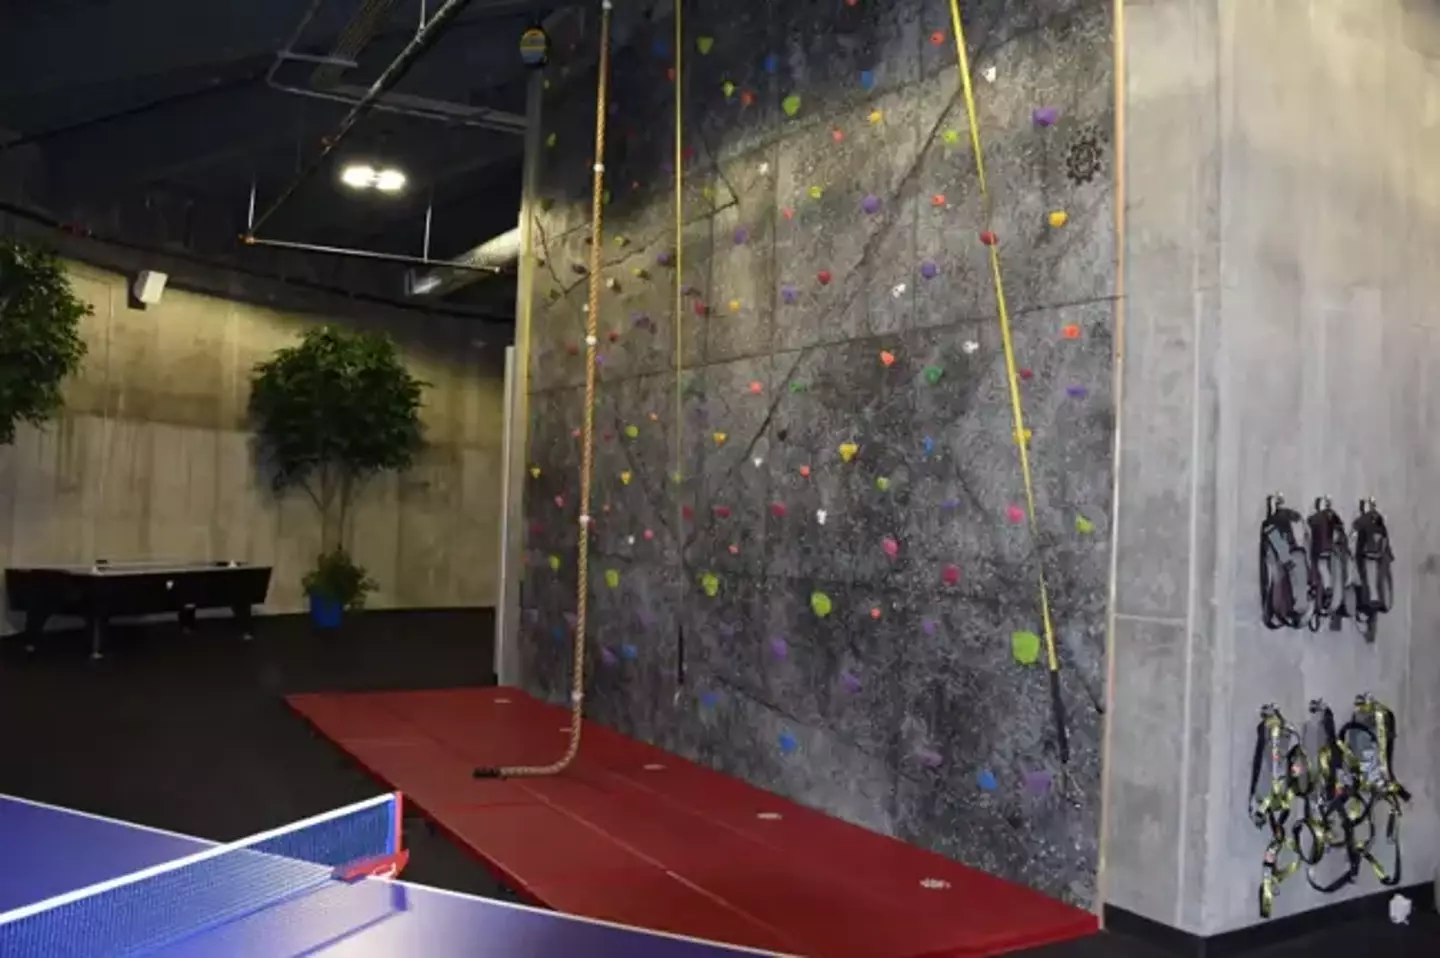 There's a climbing wall too.